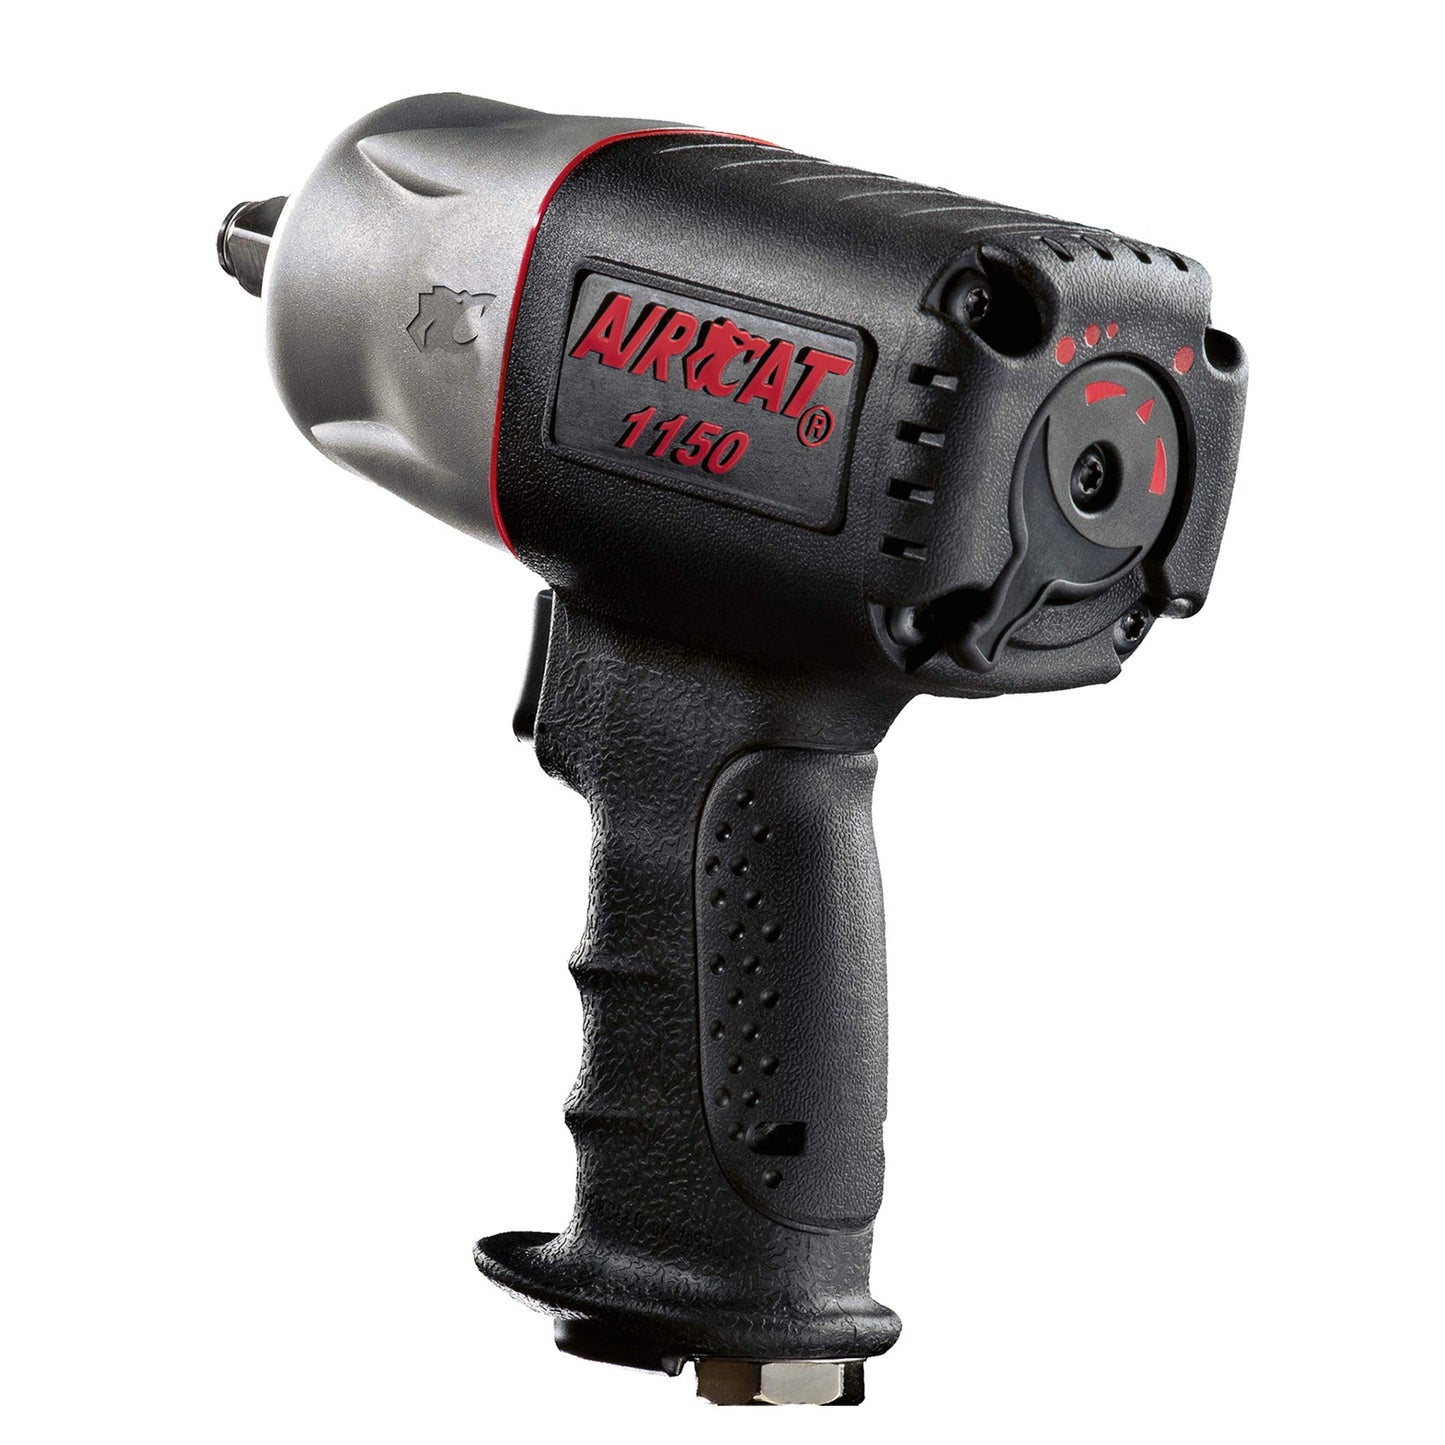 AIRCAT Pneumatic Tools 1150 1/2-Inch Composite Impact Wrench : Compact & Low Weight Power Tool : Impact Tool for Automotive Repairs & Maintenance